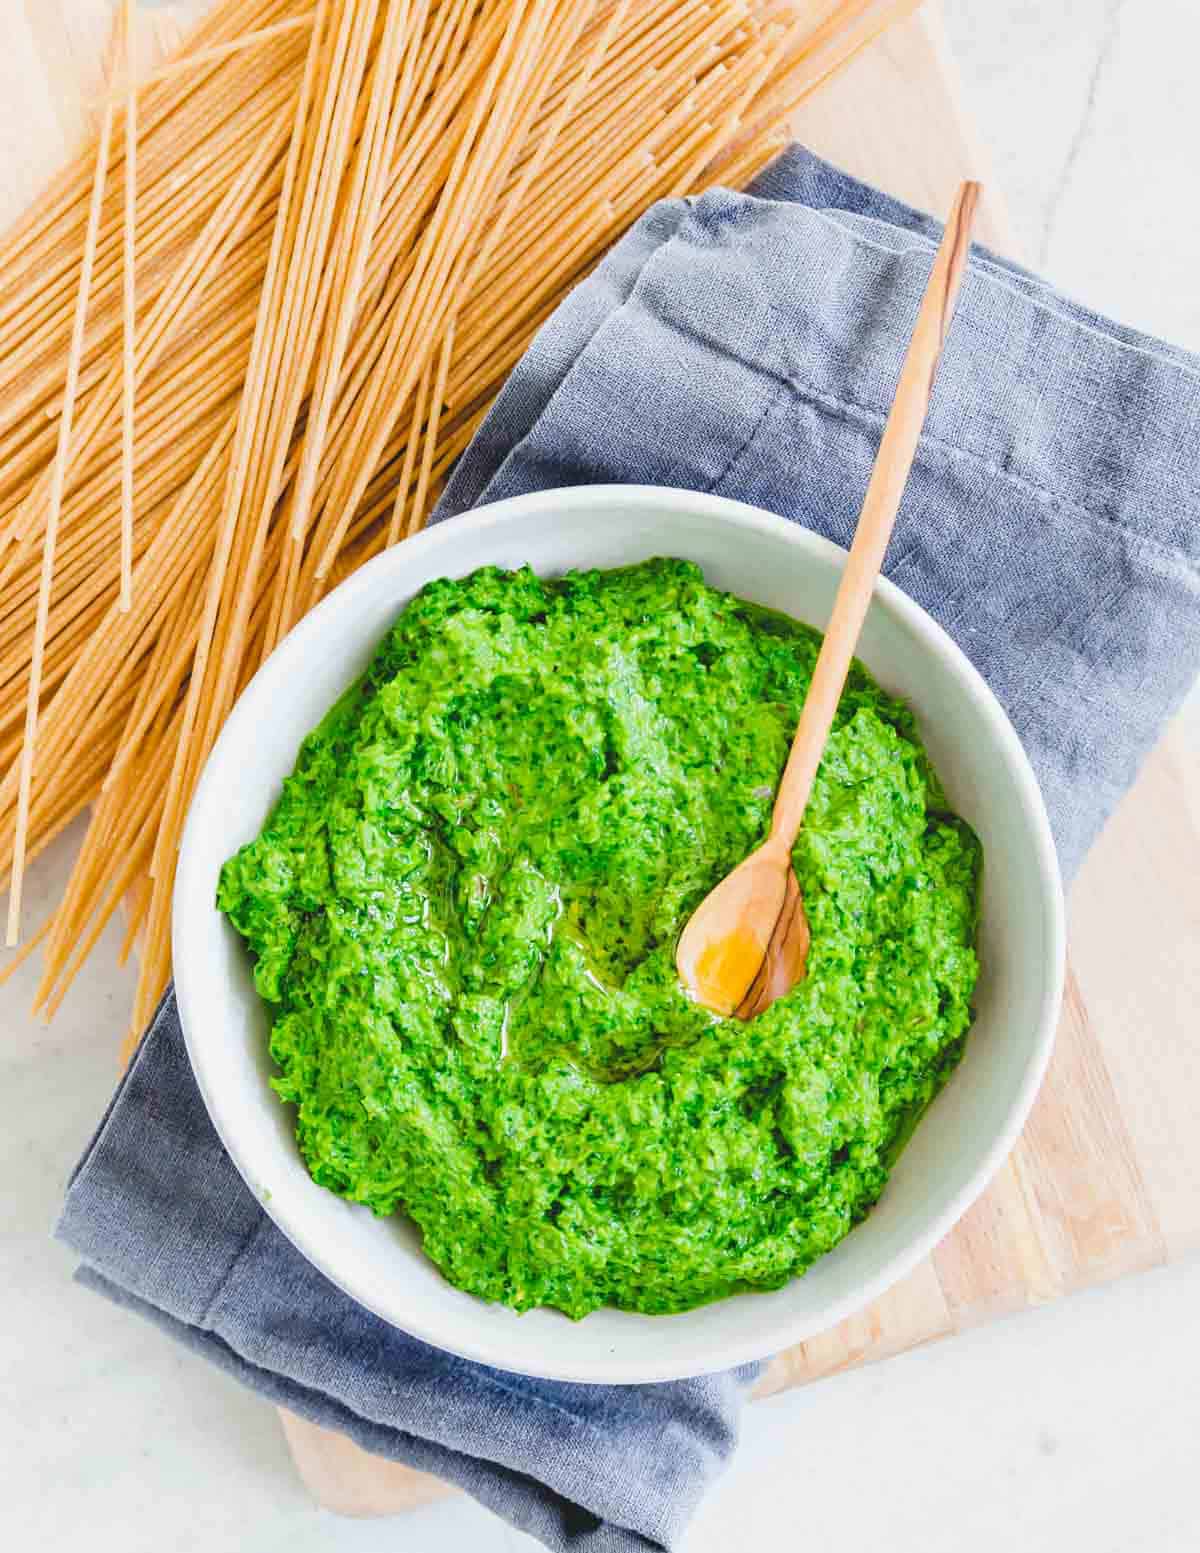 Ramp pesto in a bowl with dried spaghetti on the side.